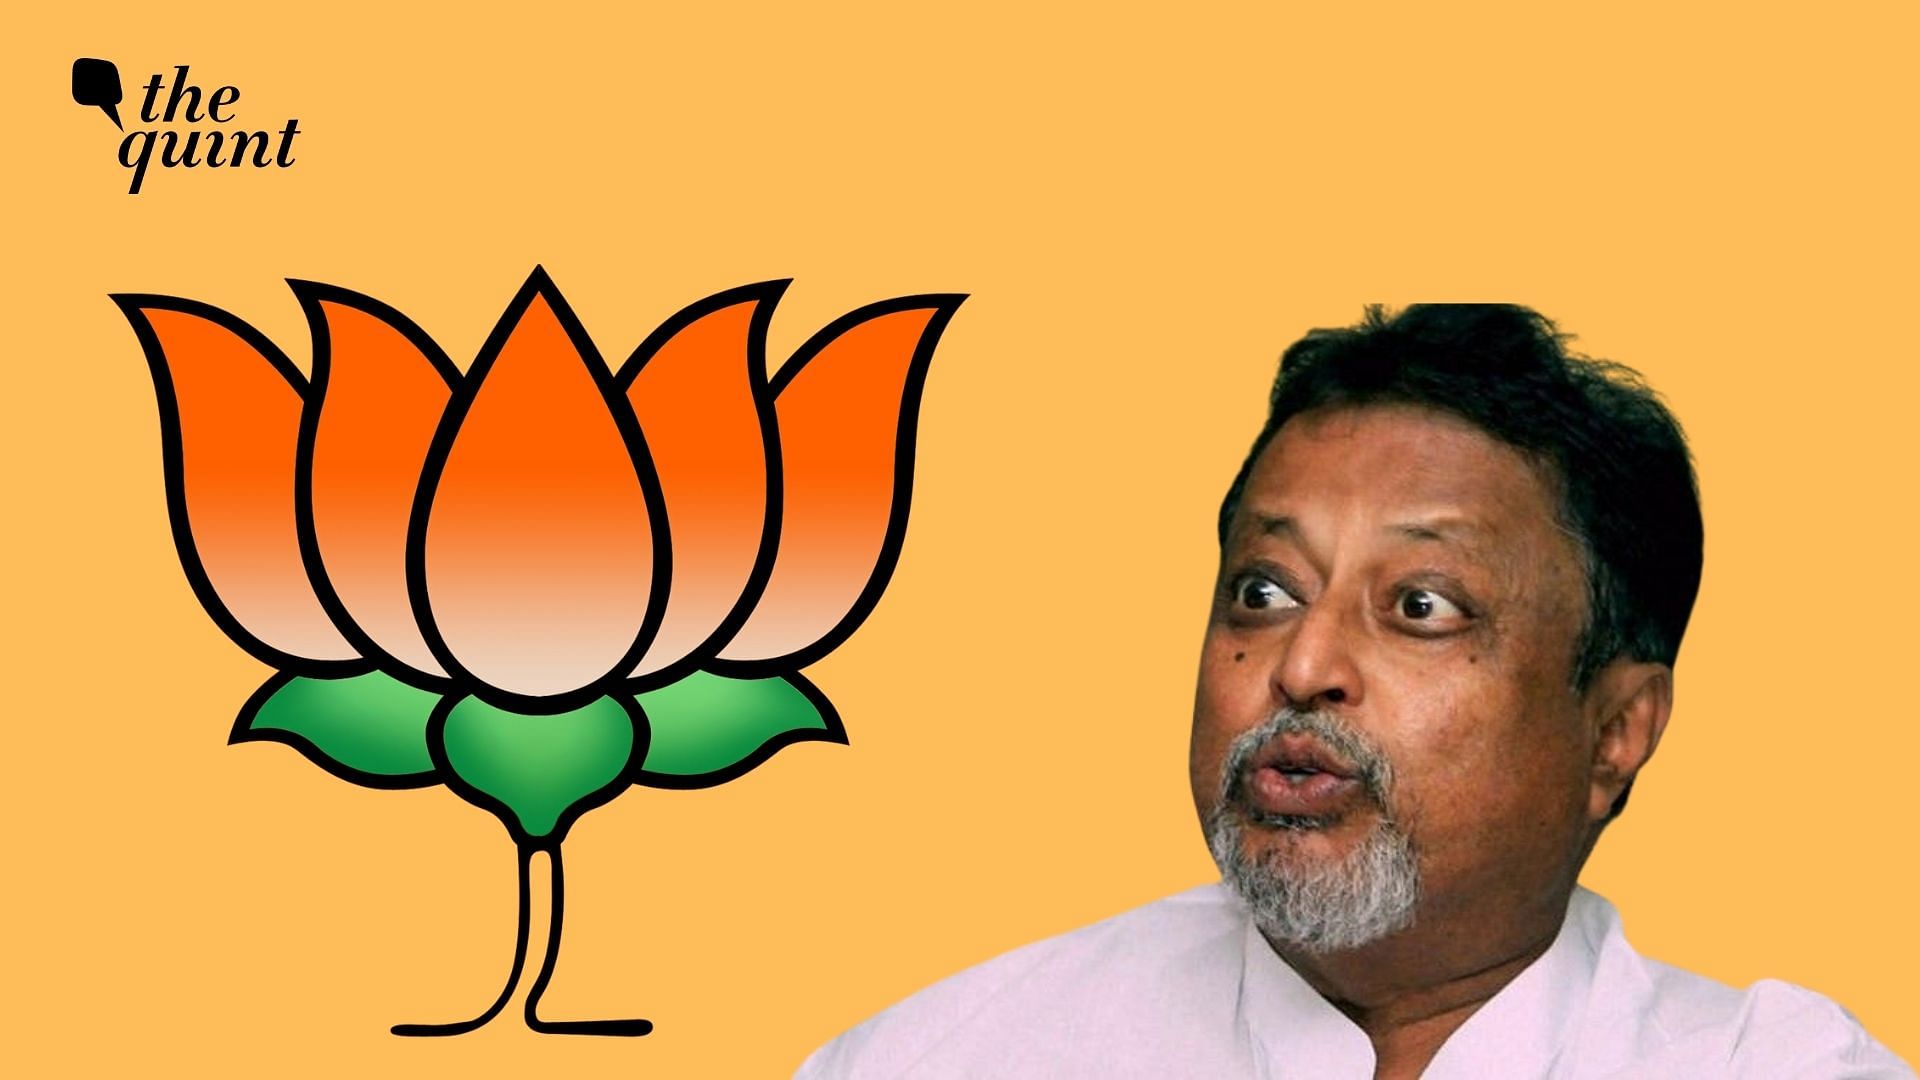 As Bharatiya Janata Party (BJP) national Vice President Mukul Roy rejoined the Trinamool Congress (TMC) on Friday, BJP leader Arjun Singh cast aspersions on the politician, accusing him spreading party’s internal information.